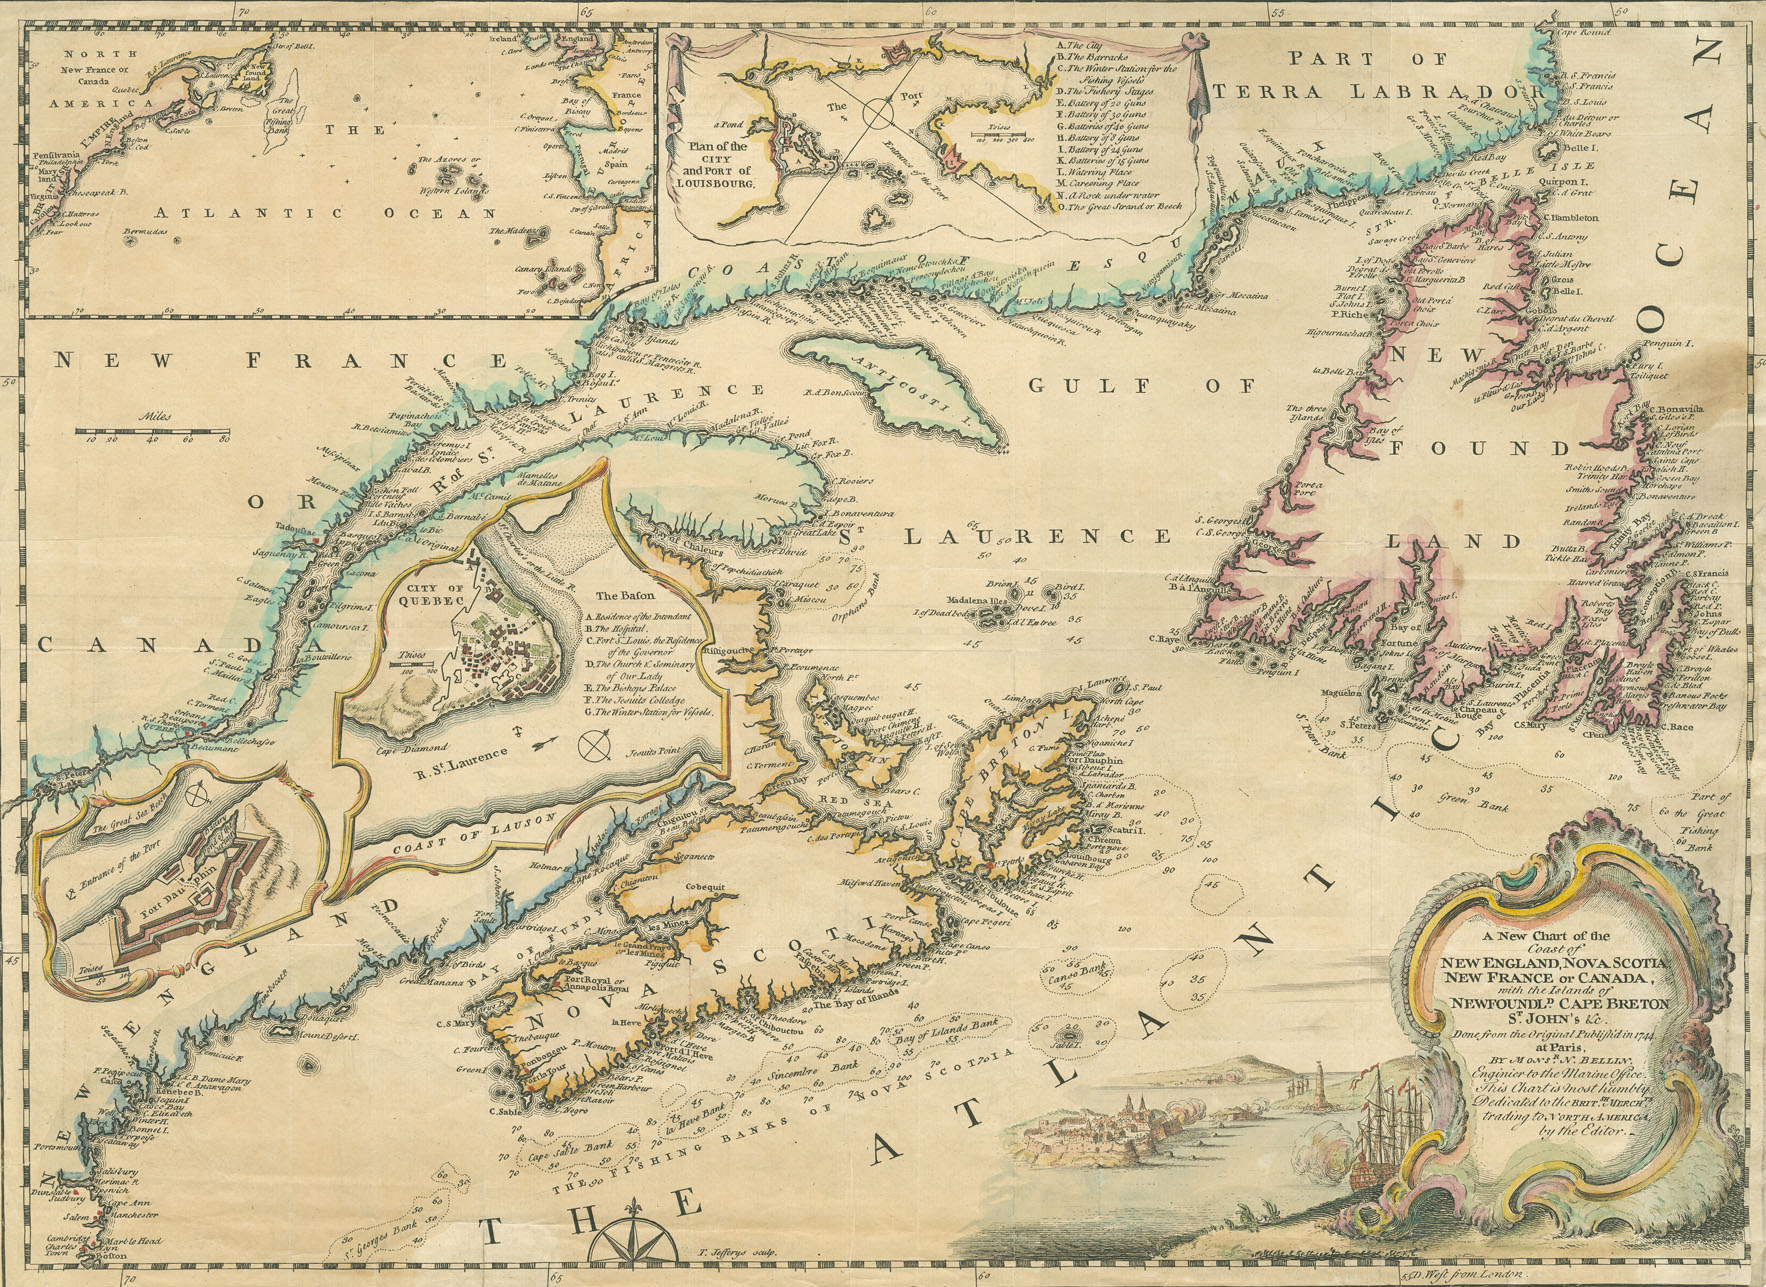 easson : A New Chart of the Coast of New England, Nova Scotia, New France or Canada